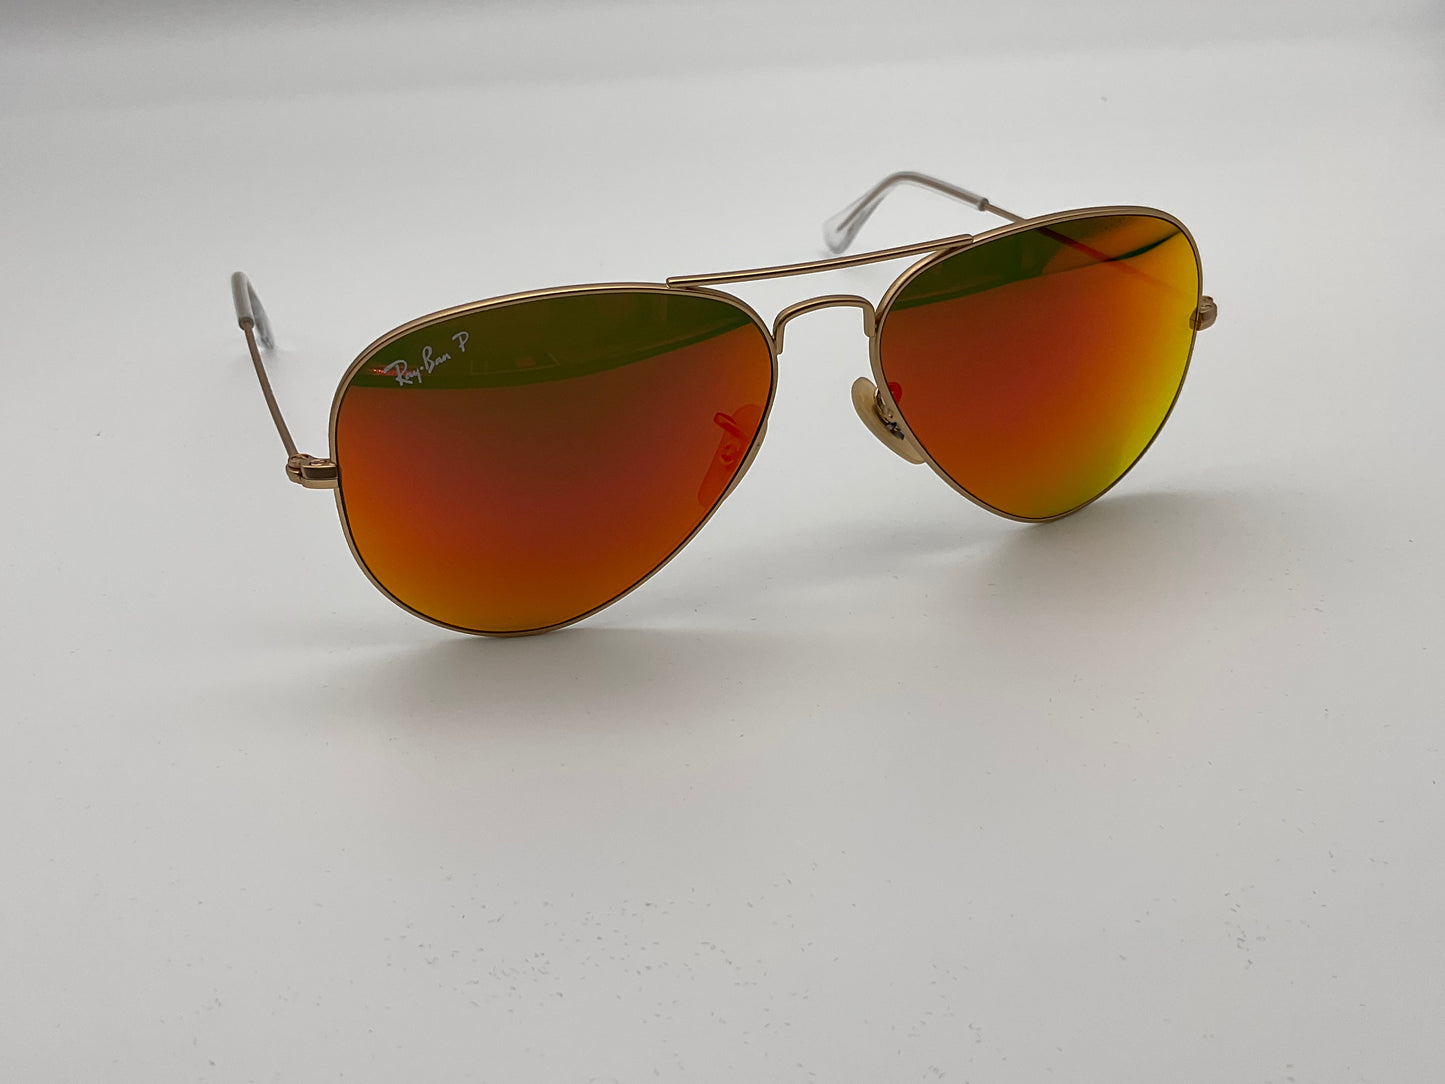 Ray Ban Aviator 58mm Flash Lenses Polarized Orange Sunglasses RB3025 112/4D made in Italy MSRP $213